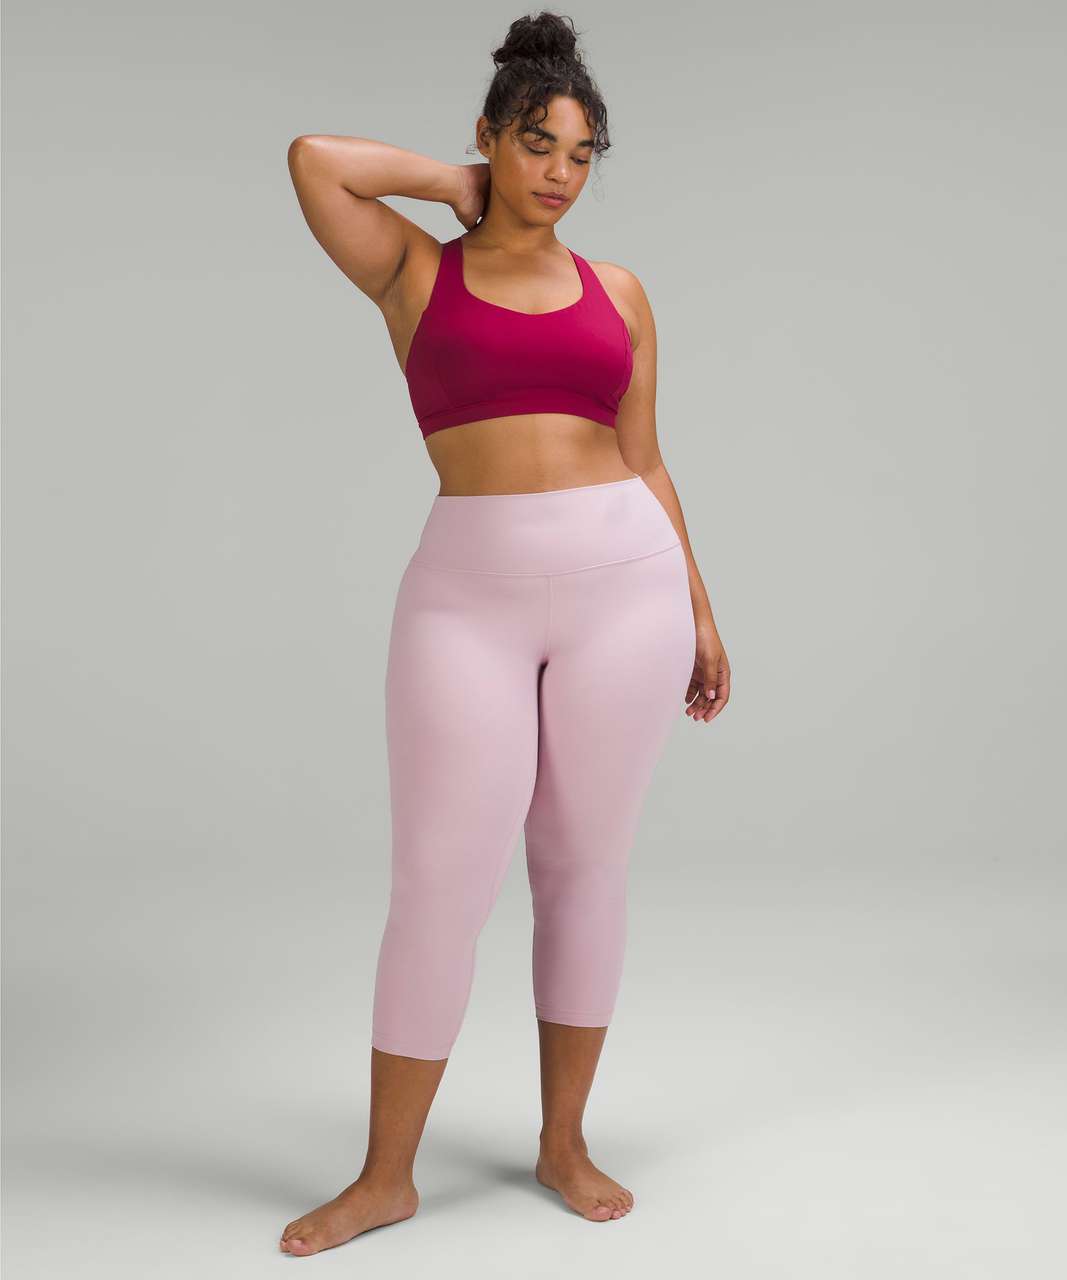 Lululemon Free to Be Serene Bra *Light Support, C/D Cup - Pomegranate / Peony Pink